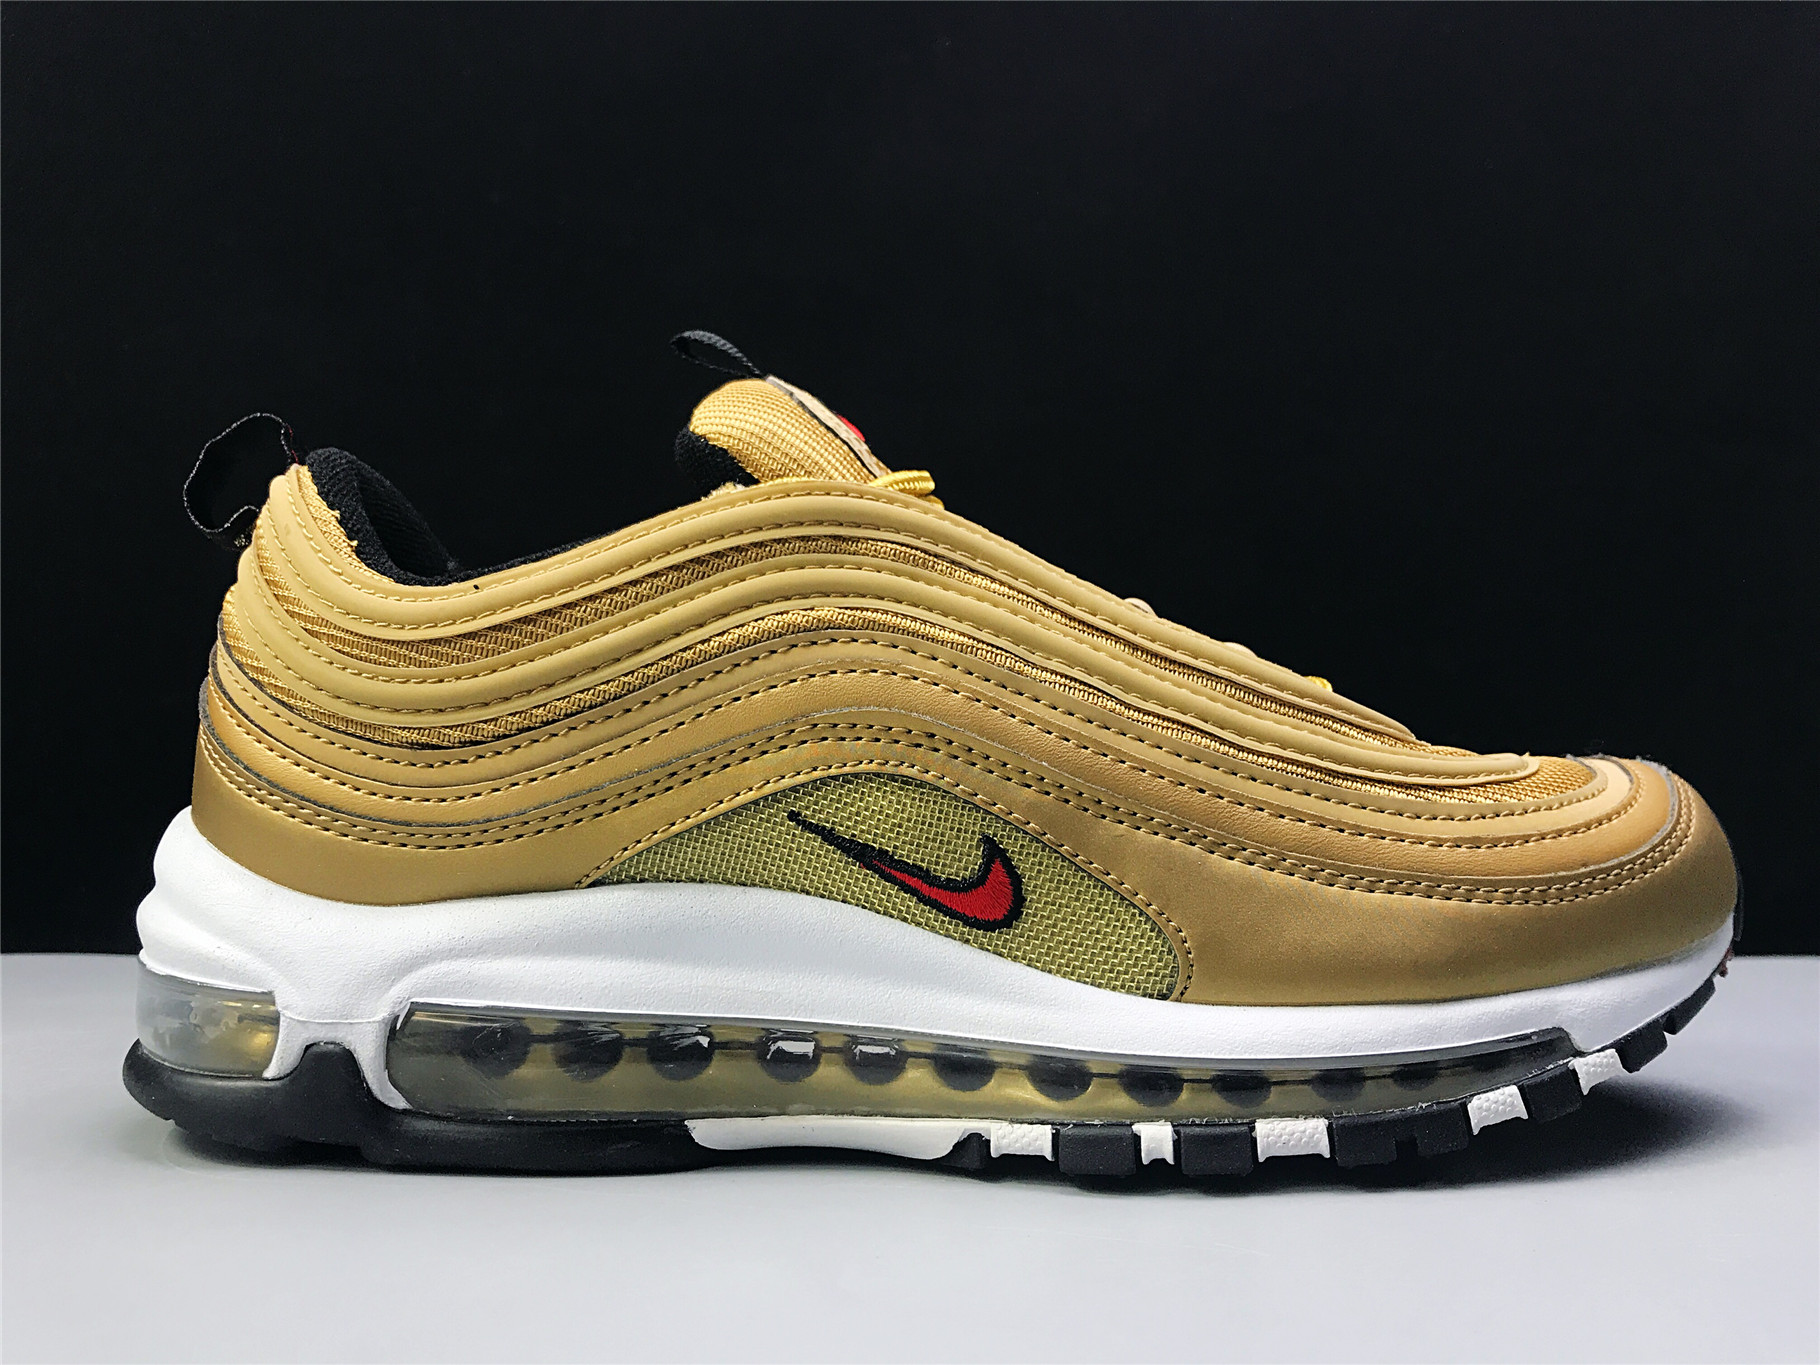 Are Air Max 97s Comfortable?